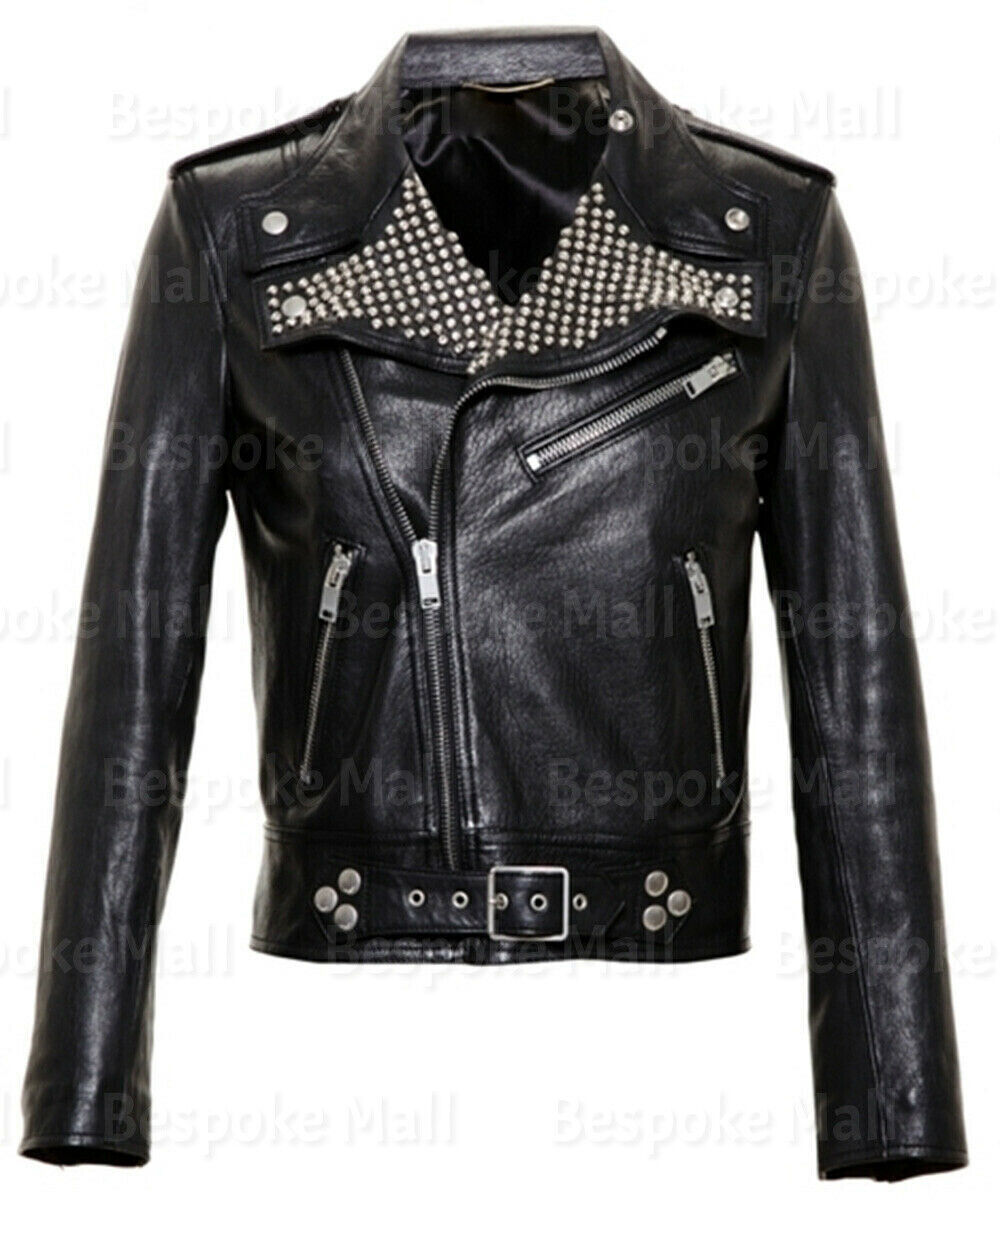 Primary image for New Men's Black Silver Studded Punk Unique Zippered Biker Leather Jacket-702